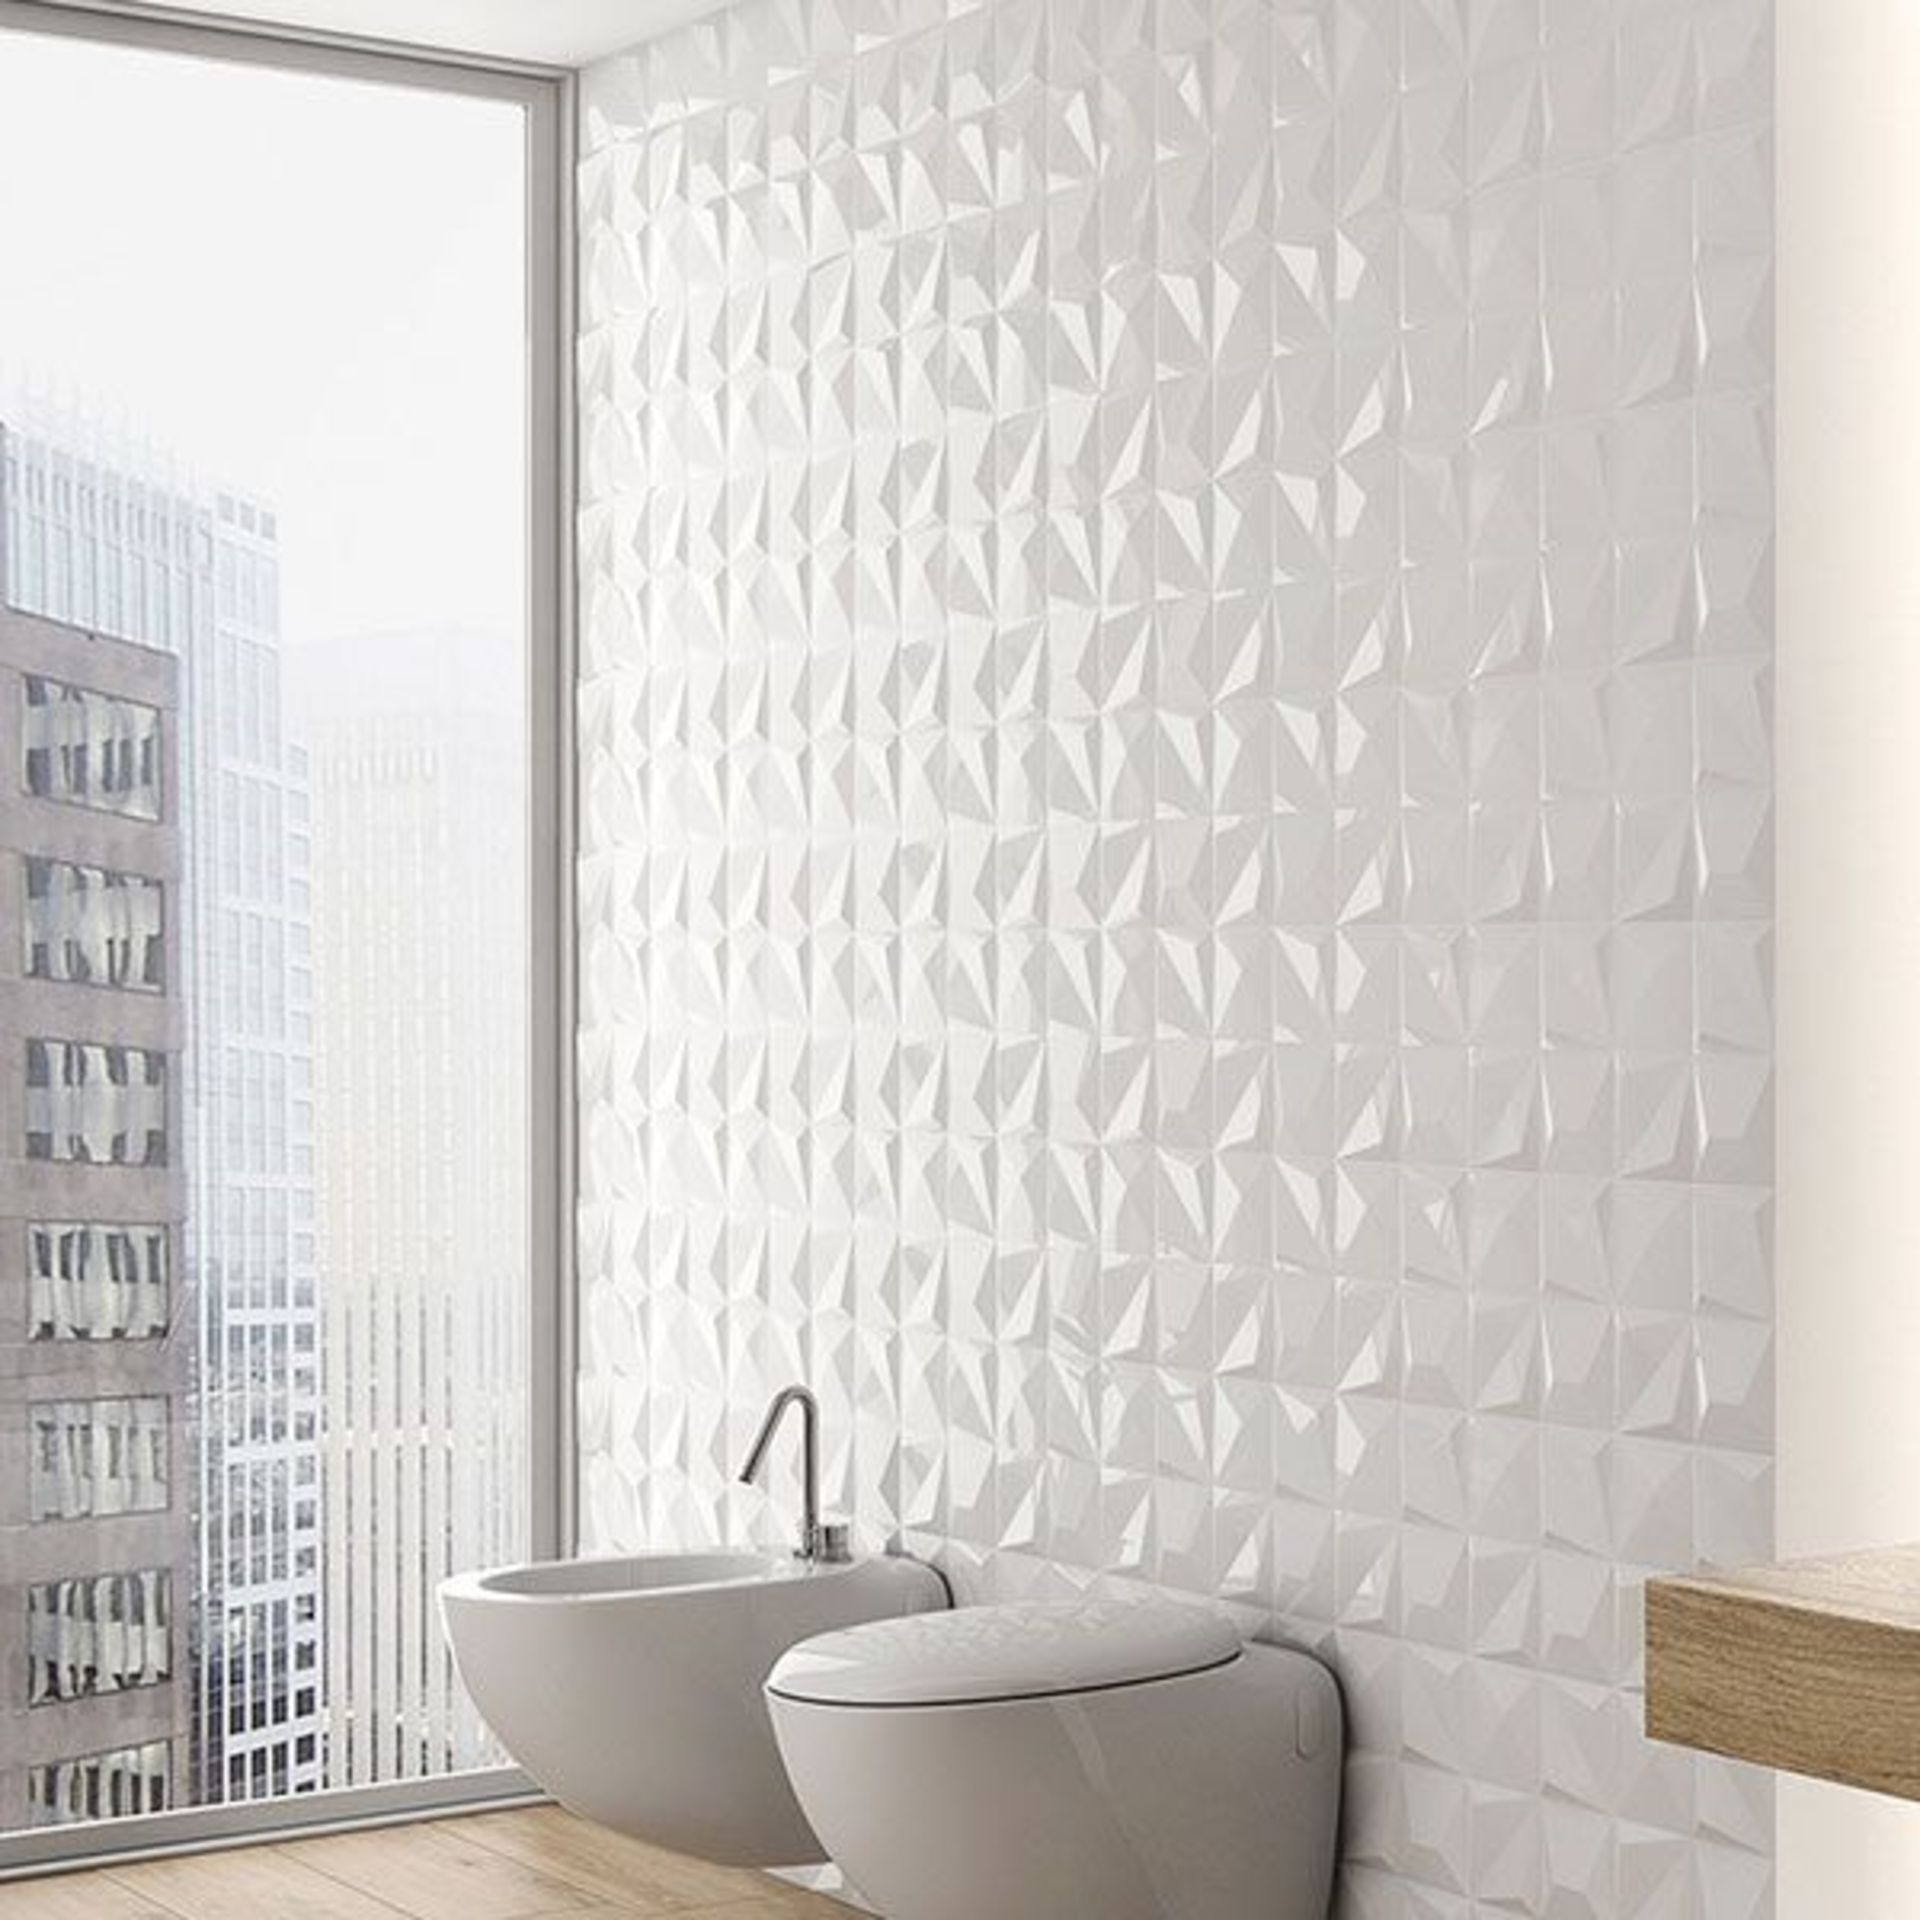 NEW 8.55m2 3D White Star Effect Wall and Floor Tiles. 300x600mm per tile. 8mm Thick. N gloss...